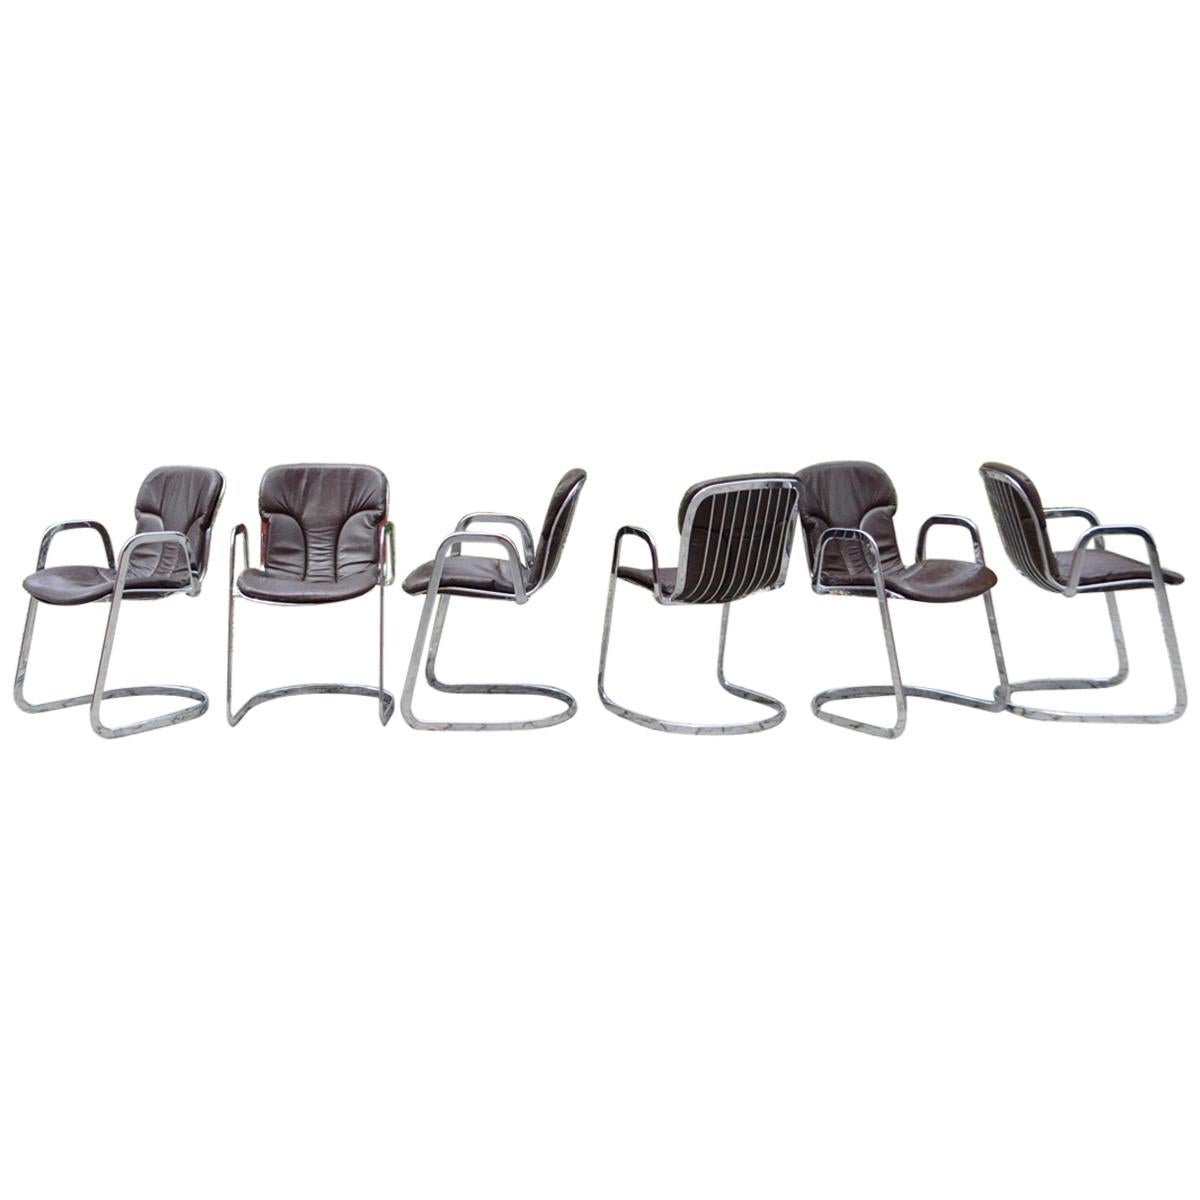 Cidue Dining Armchairs Chairs Design by Willy Rizzo Set of 6 Chrome and Leather